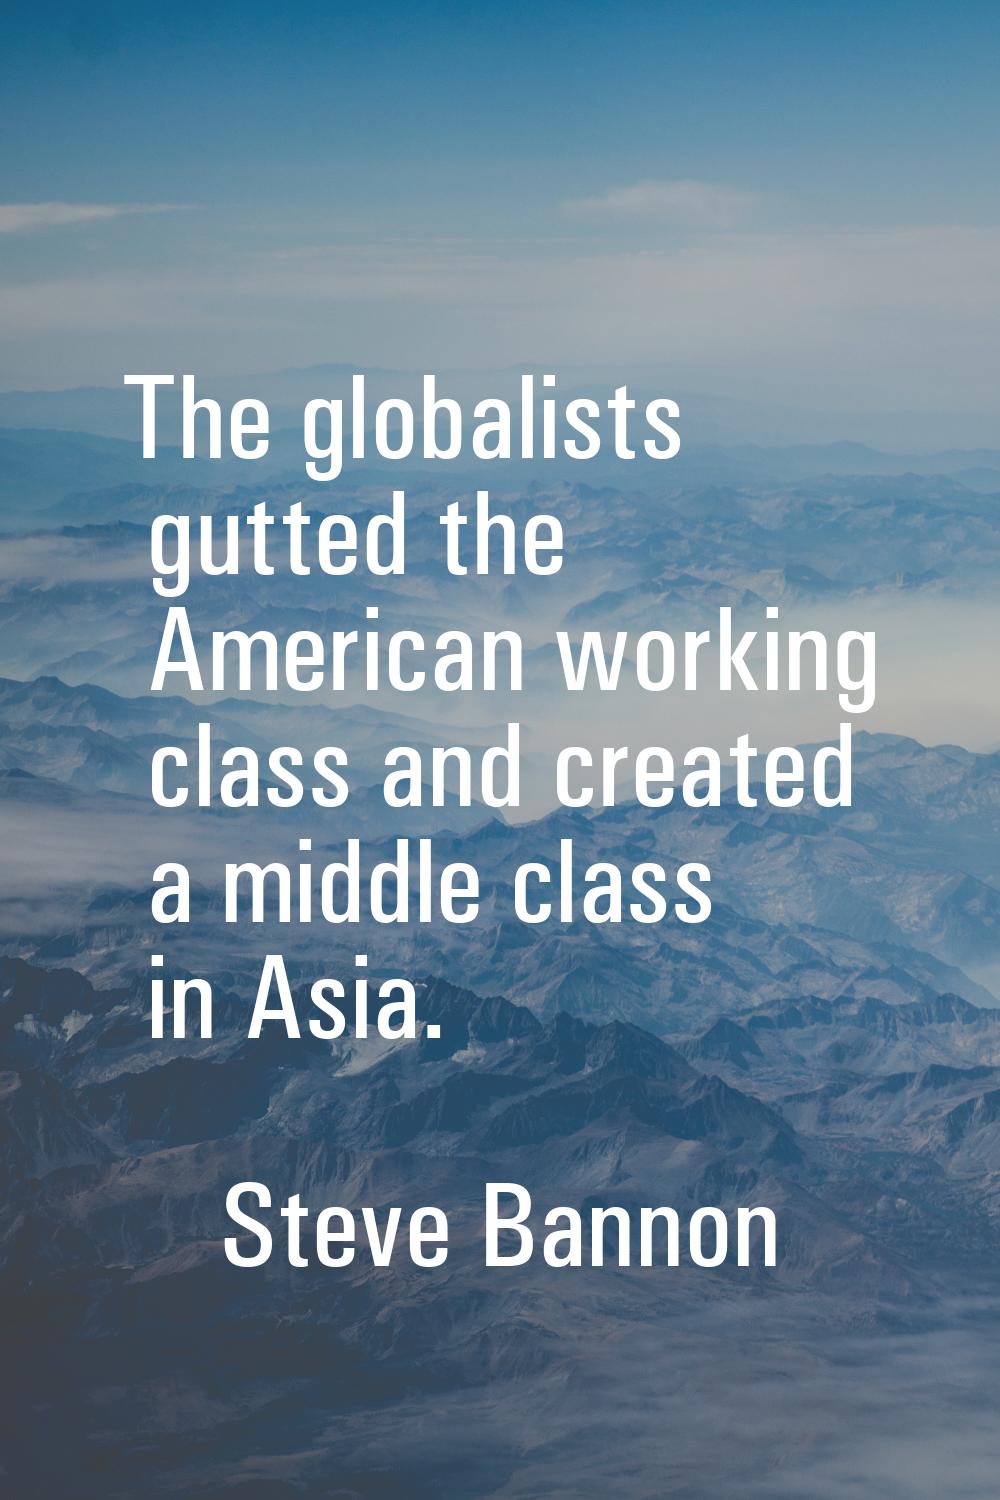 The globalists gutted the American working class and created a middle class in Asia.